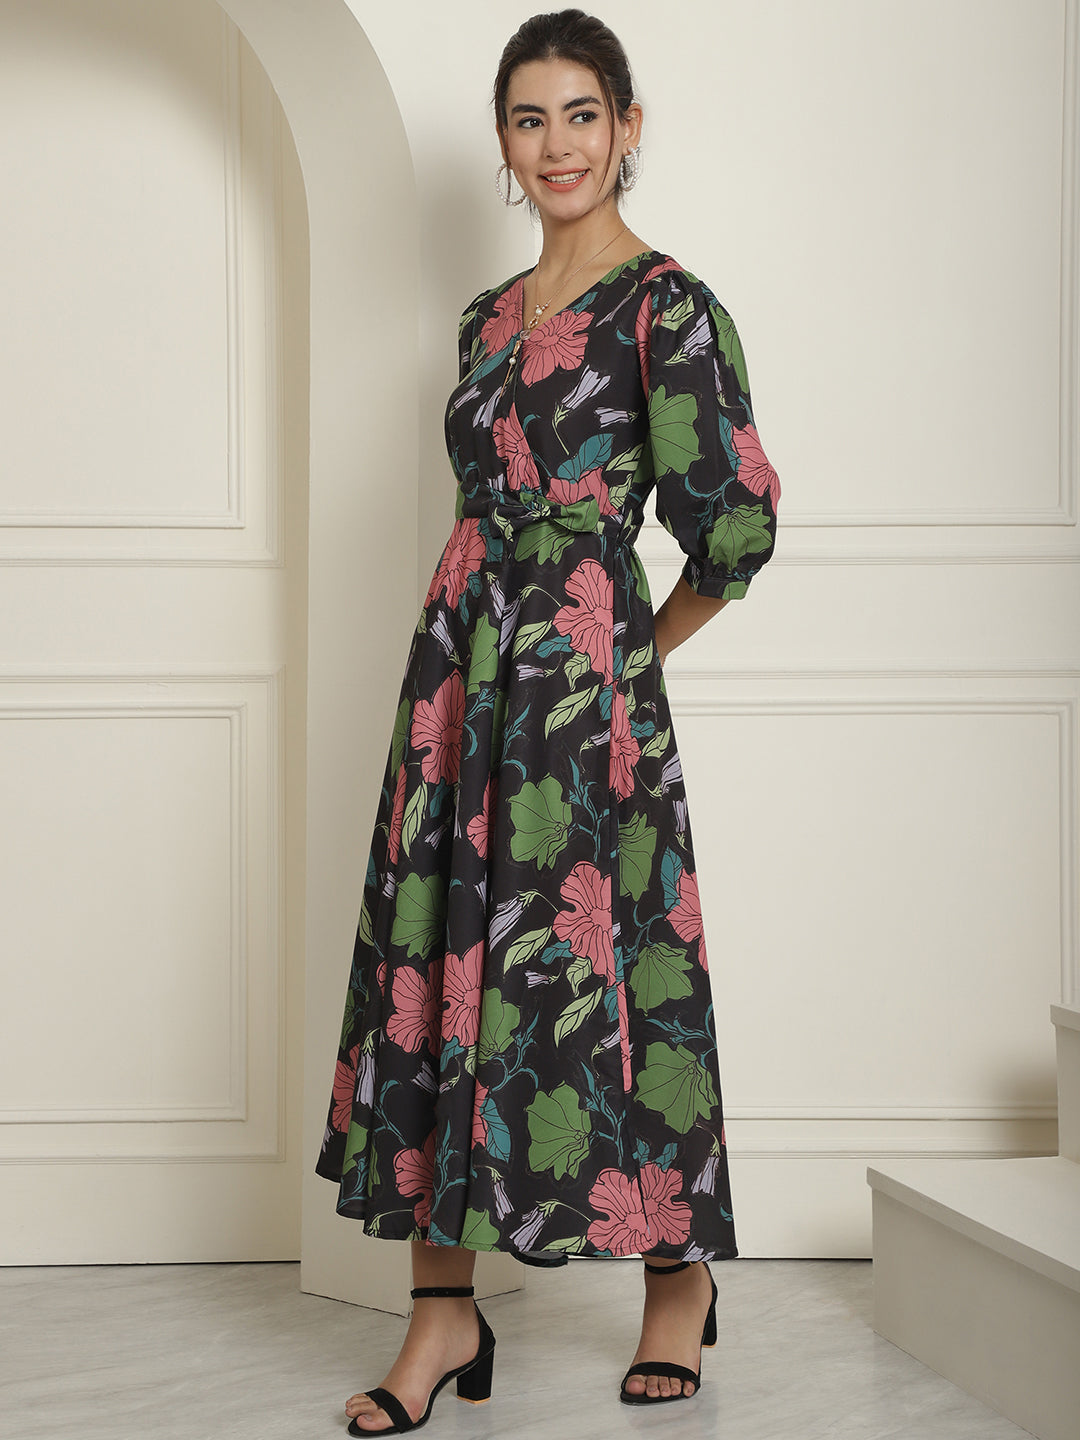 Women's Black Floral Printed A-line Dress With Belt